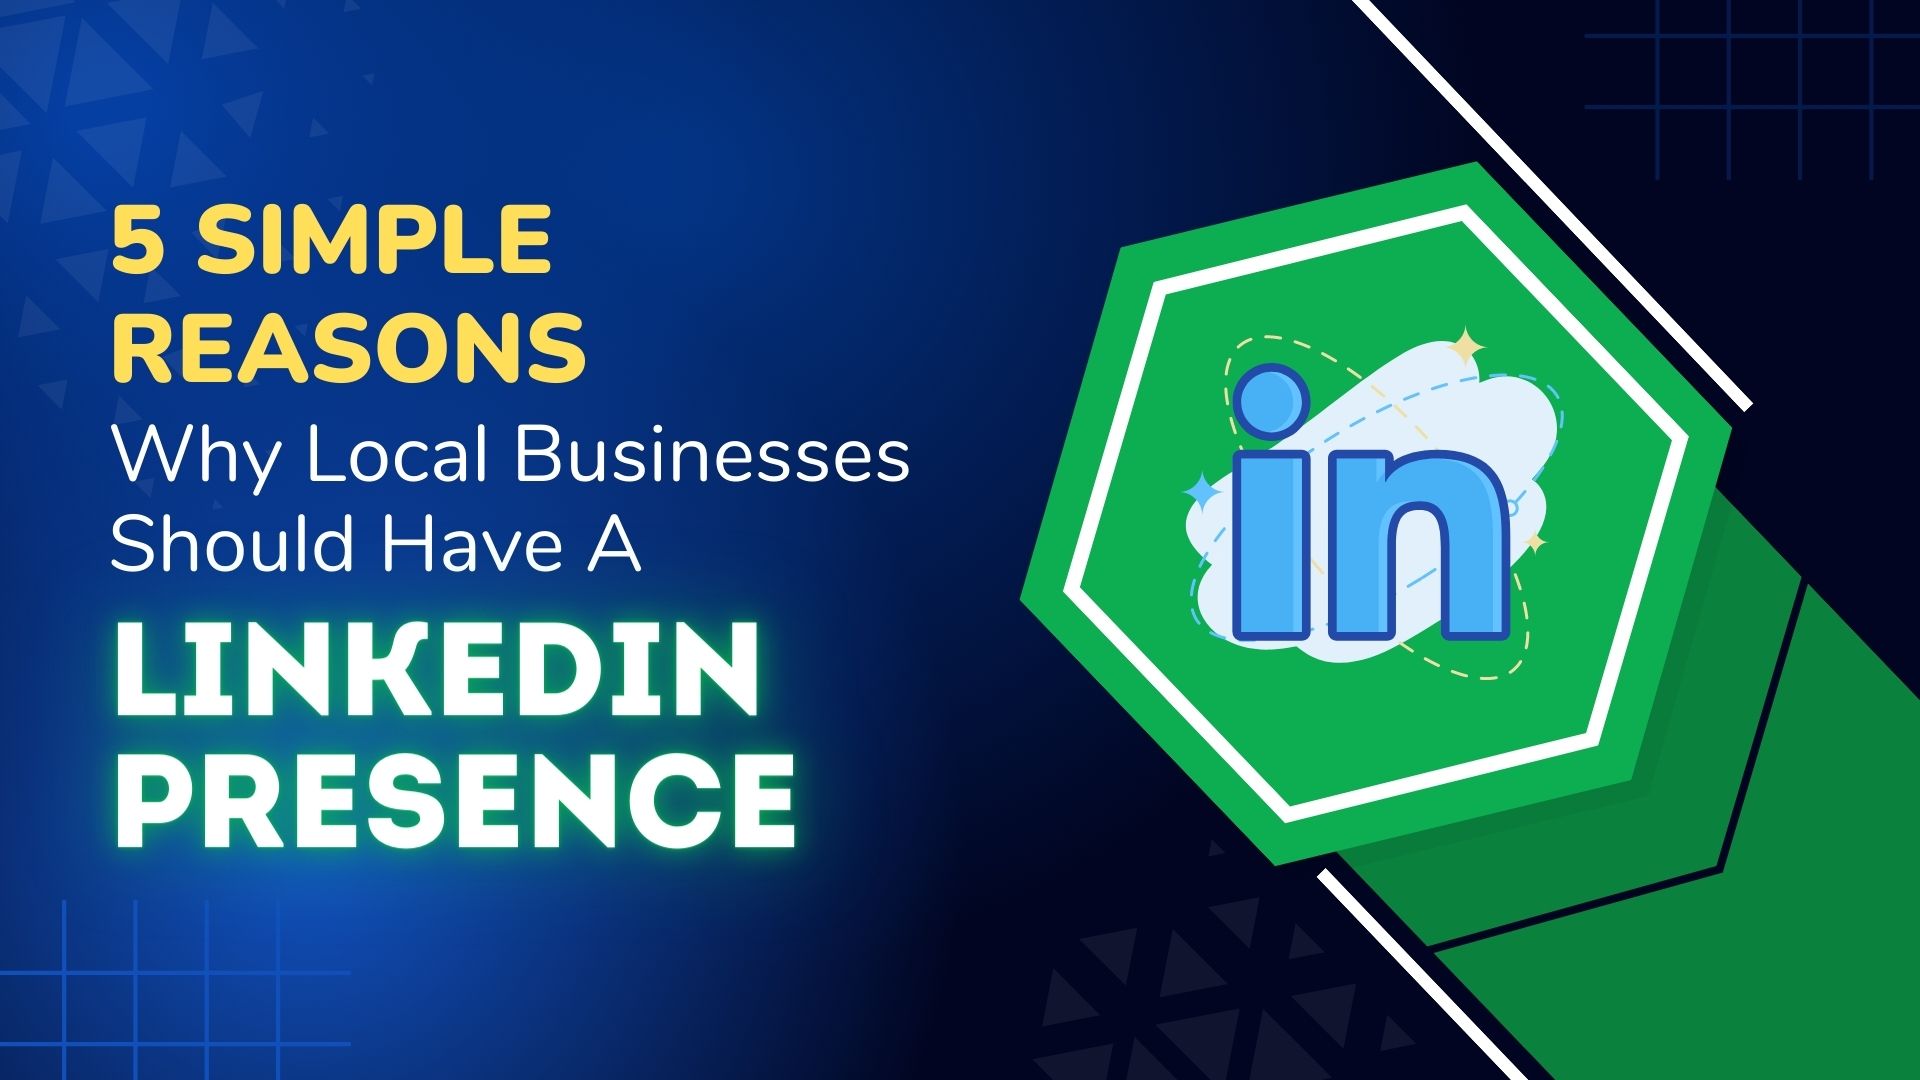 5 Simple Reasons Why Local Businesses Should Have A LinkedIn Presence